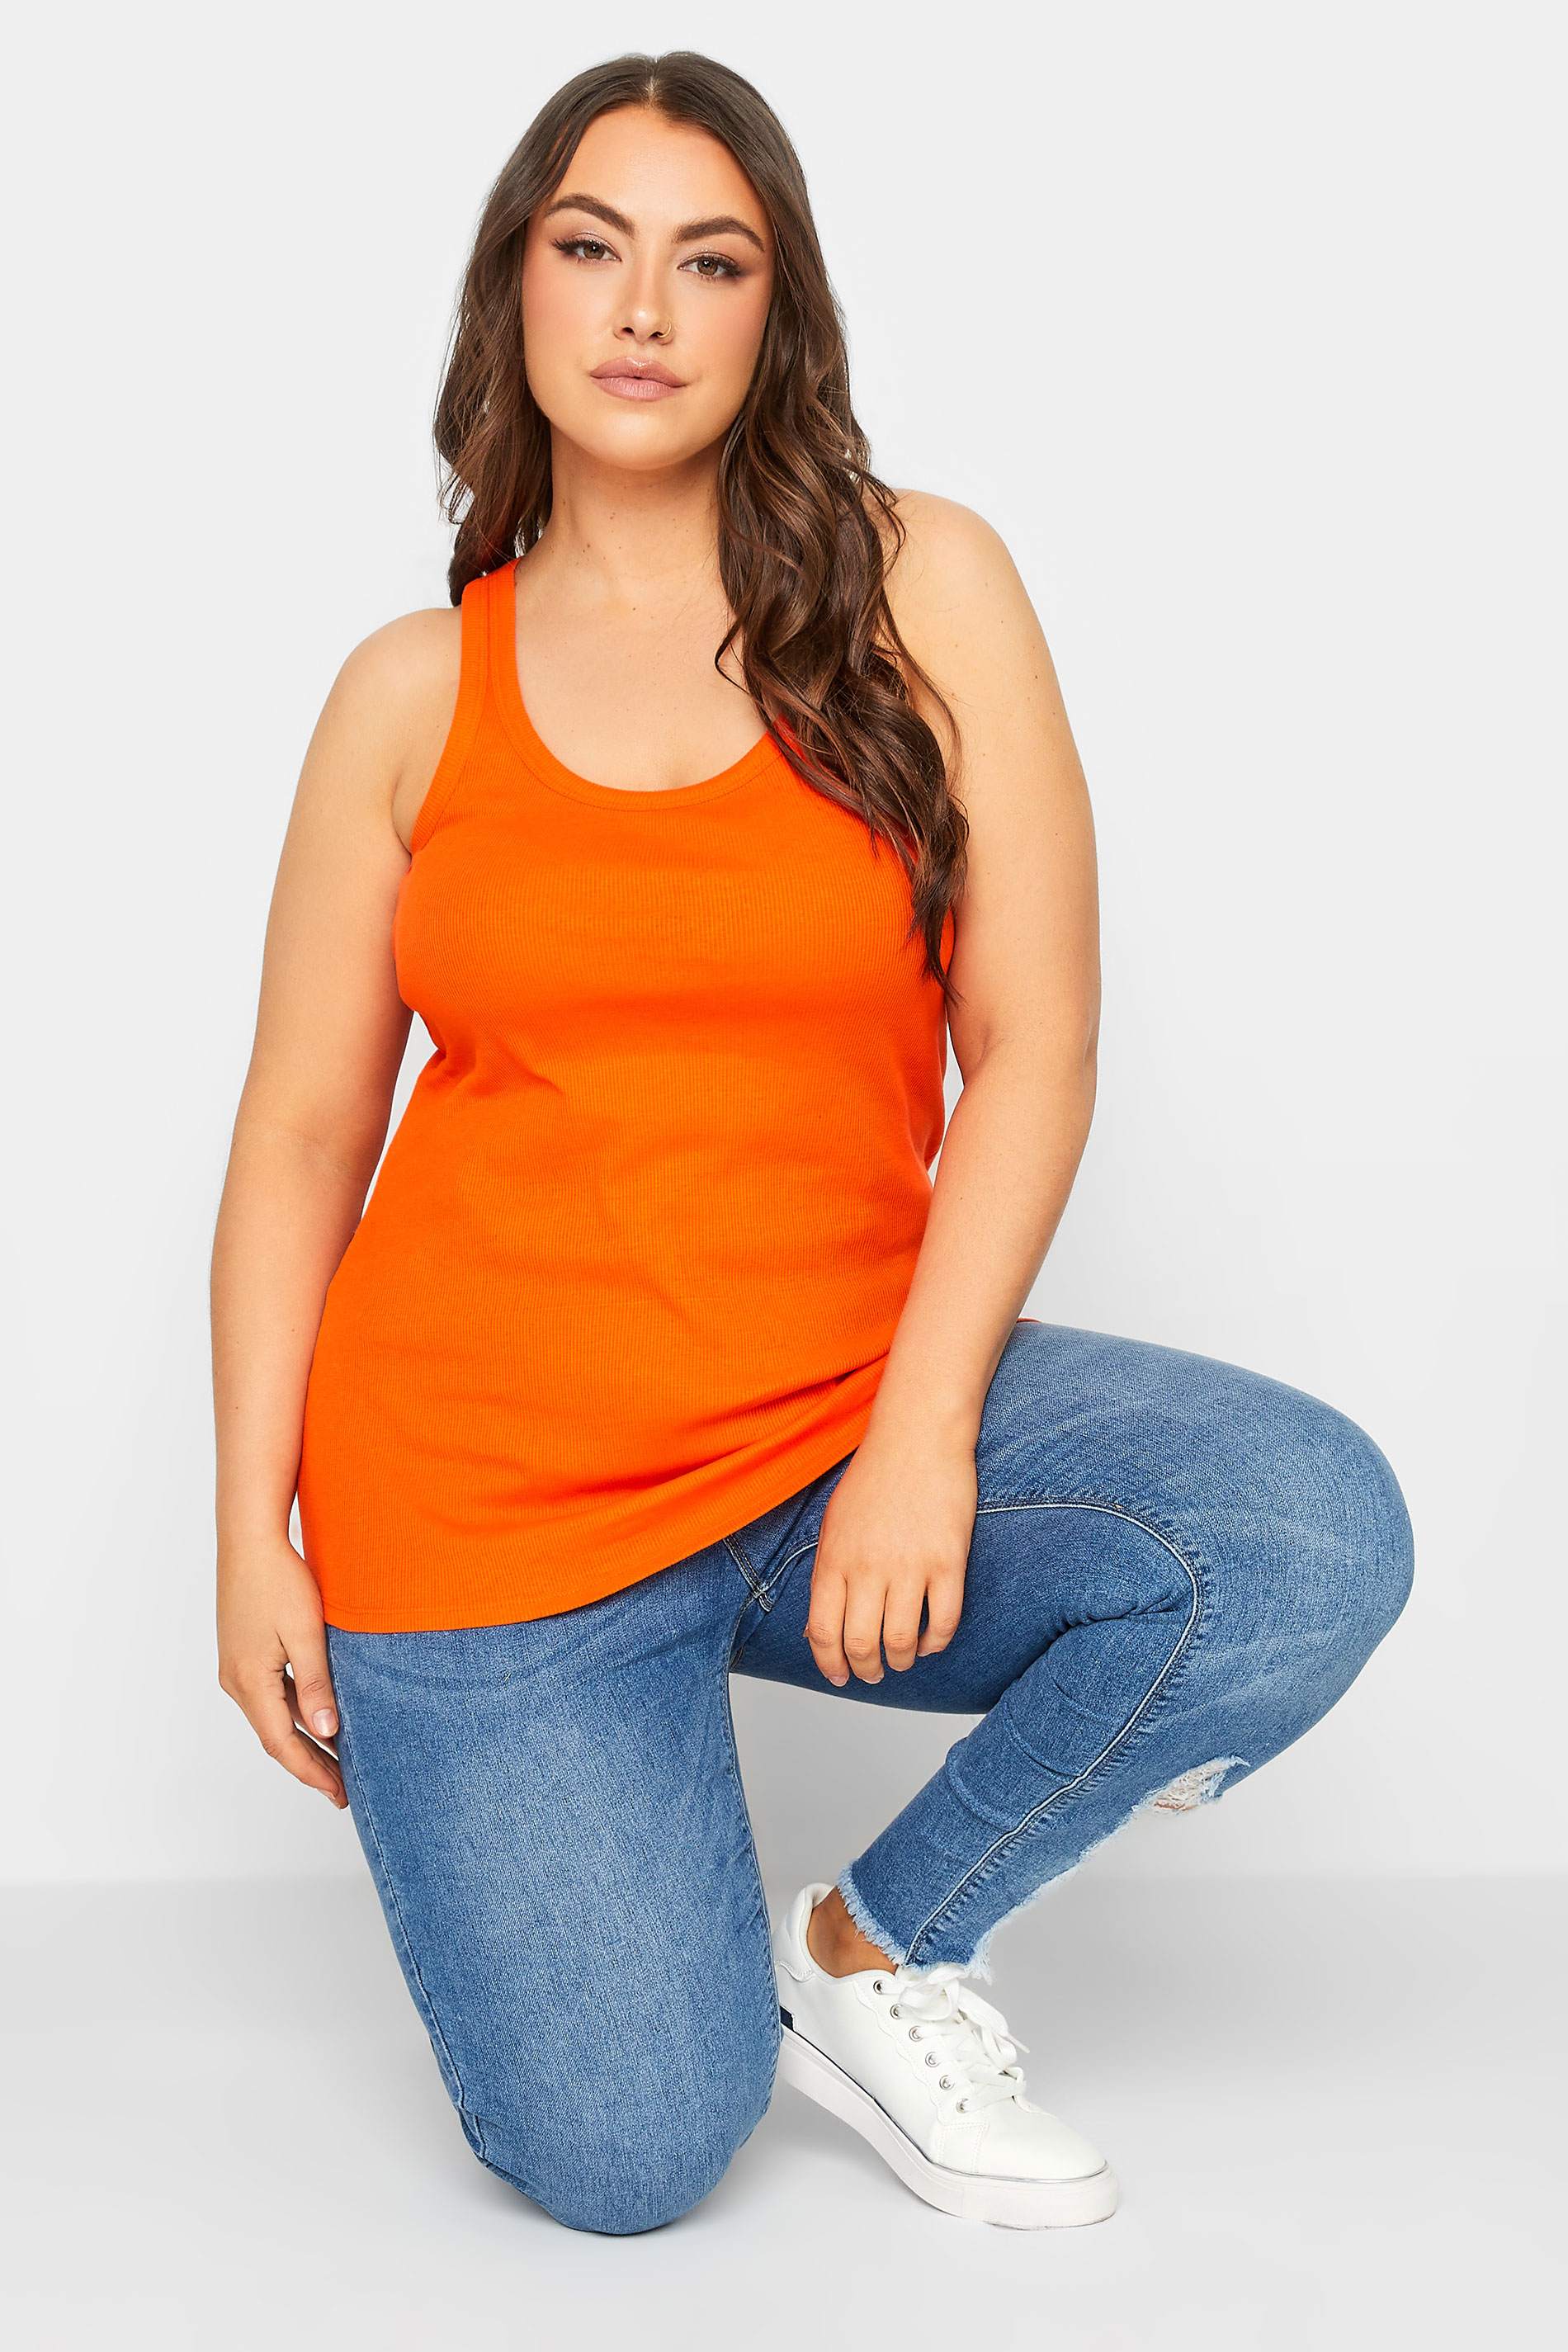 YOURS Plus Size Orange Racer Back Vest Top | Yours Clothing 1